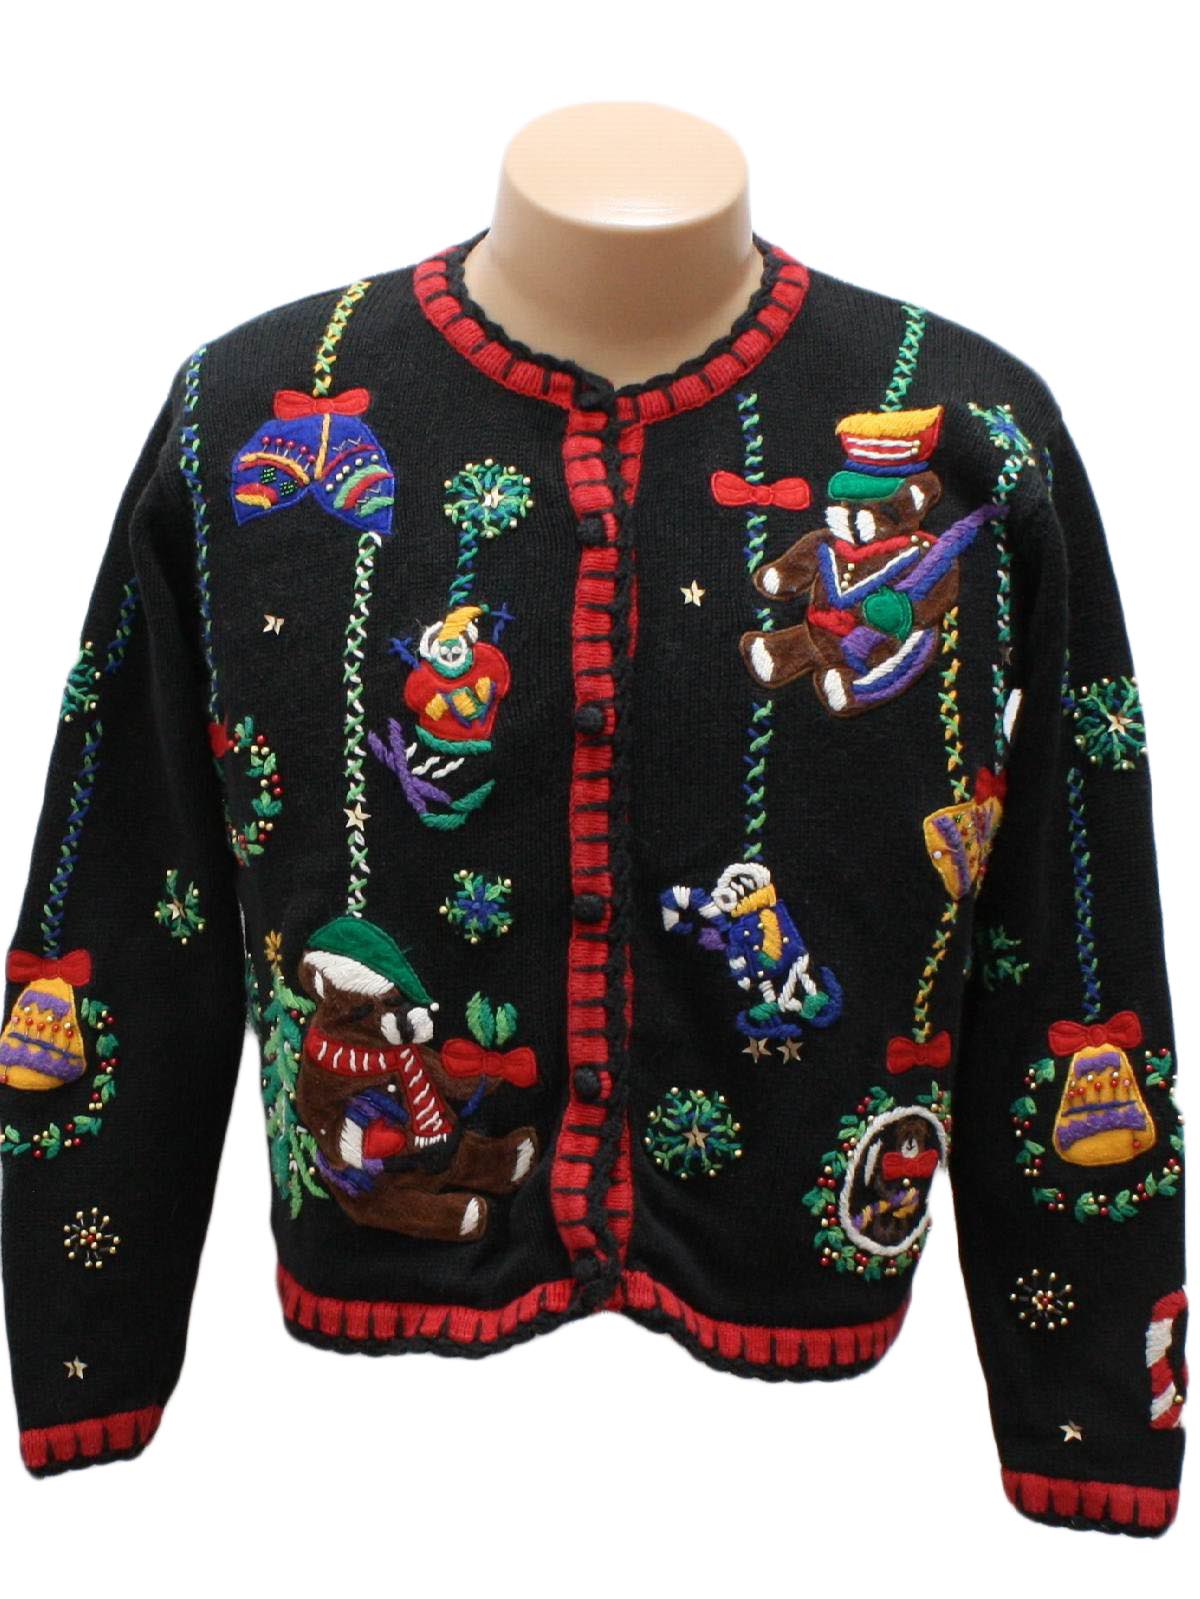 Womens Ugly Christmas Sweater: -Segue- Womens black background, red ...